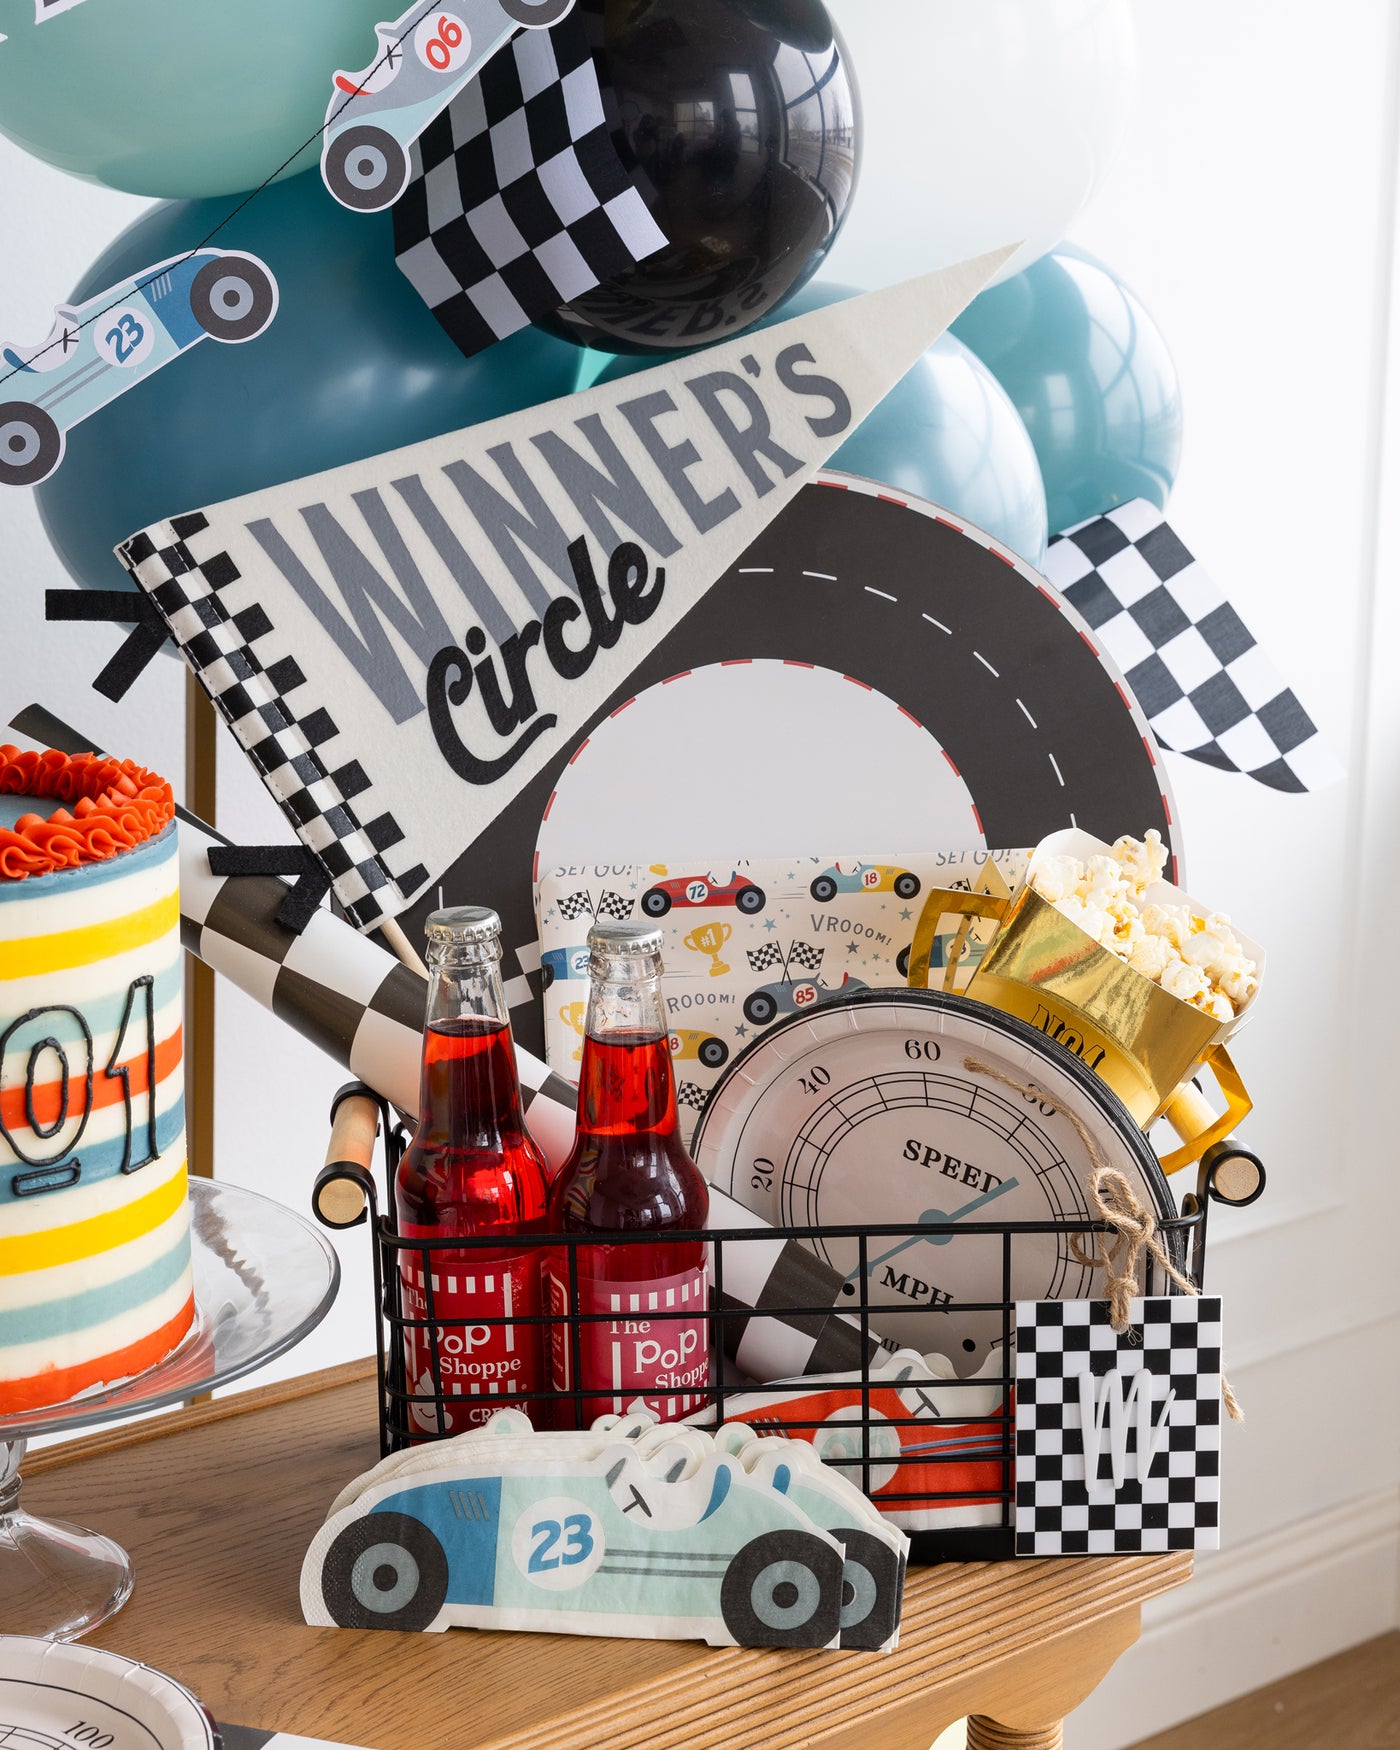 Race car Occasions Bin showing a display of decorations including a cute winner's circle pennant paper plates and placemats